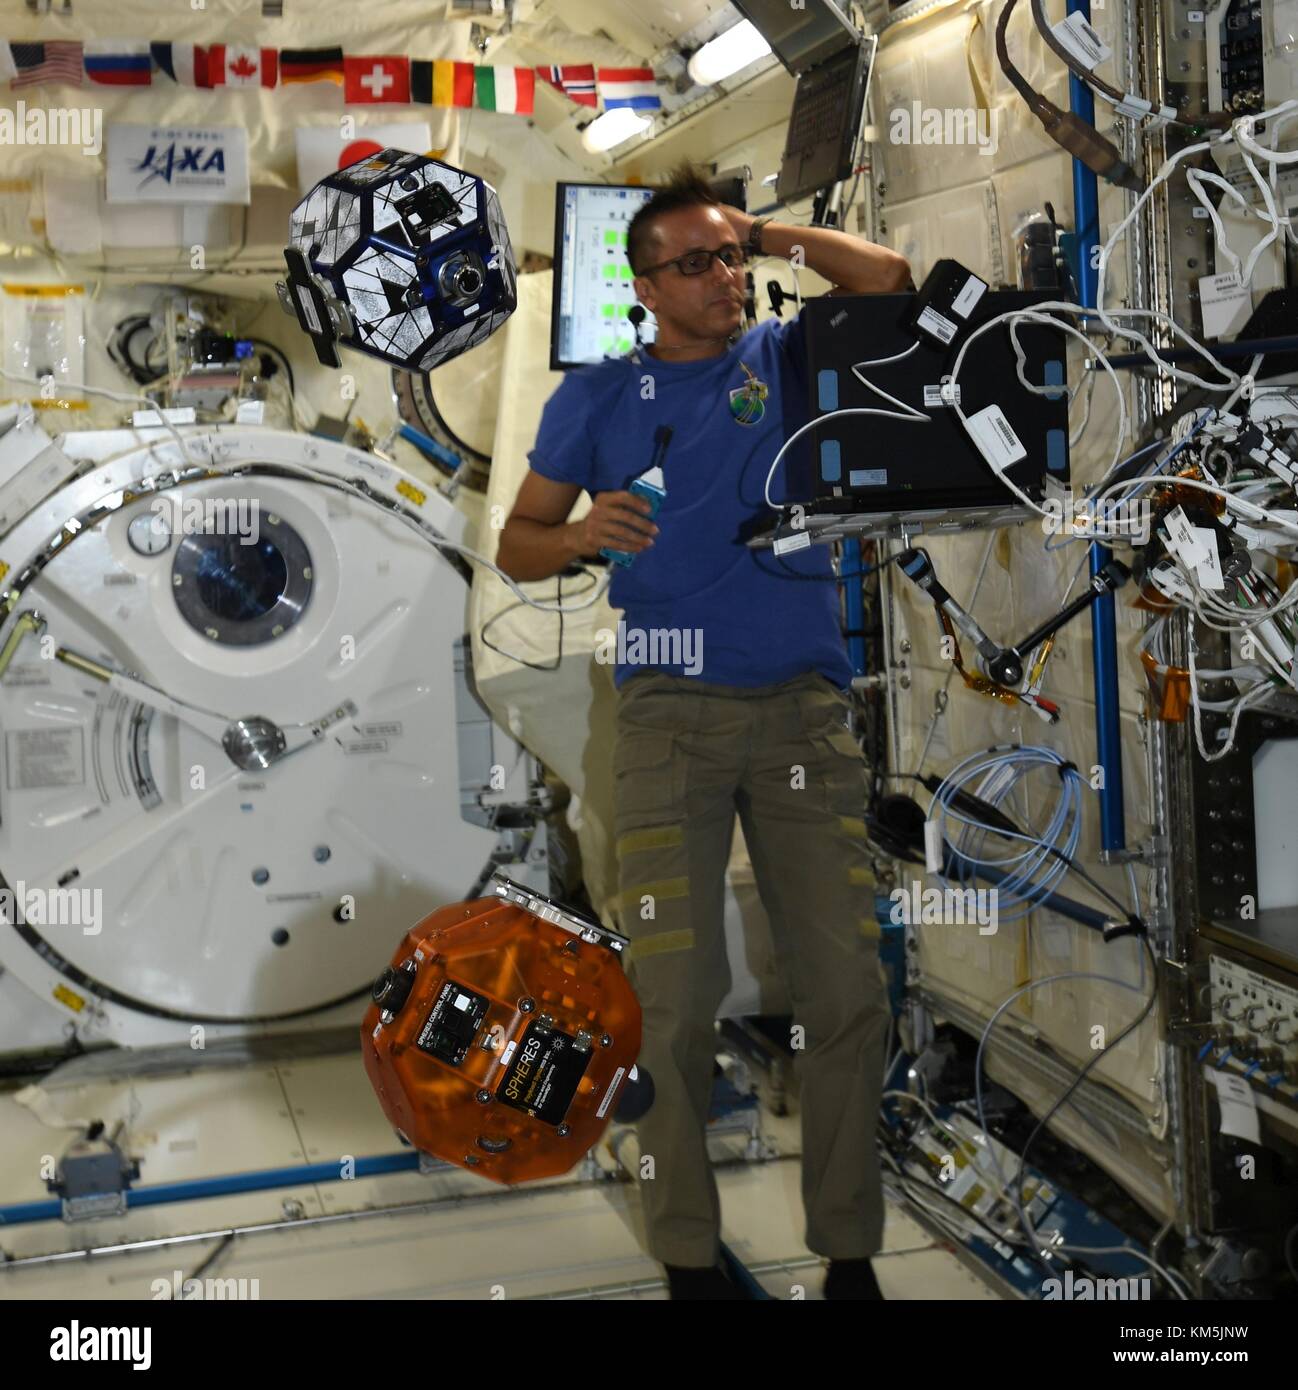 International Space Station, Earth Orbit. 04th Dec, 2017. Expedition 53 American astronaut Joe Acaba during a test of the Zero Robotics student project aboard the International Space Station December 4, 2017 in Earth Orbit. Zero Robotics is a robotics programming competition for High School and Middle School students using SPHERES satellites inside the International Space Station. Credit: Planetpix/Alamy Live News Stock Photo